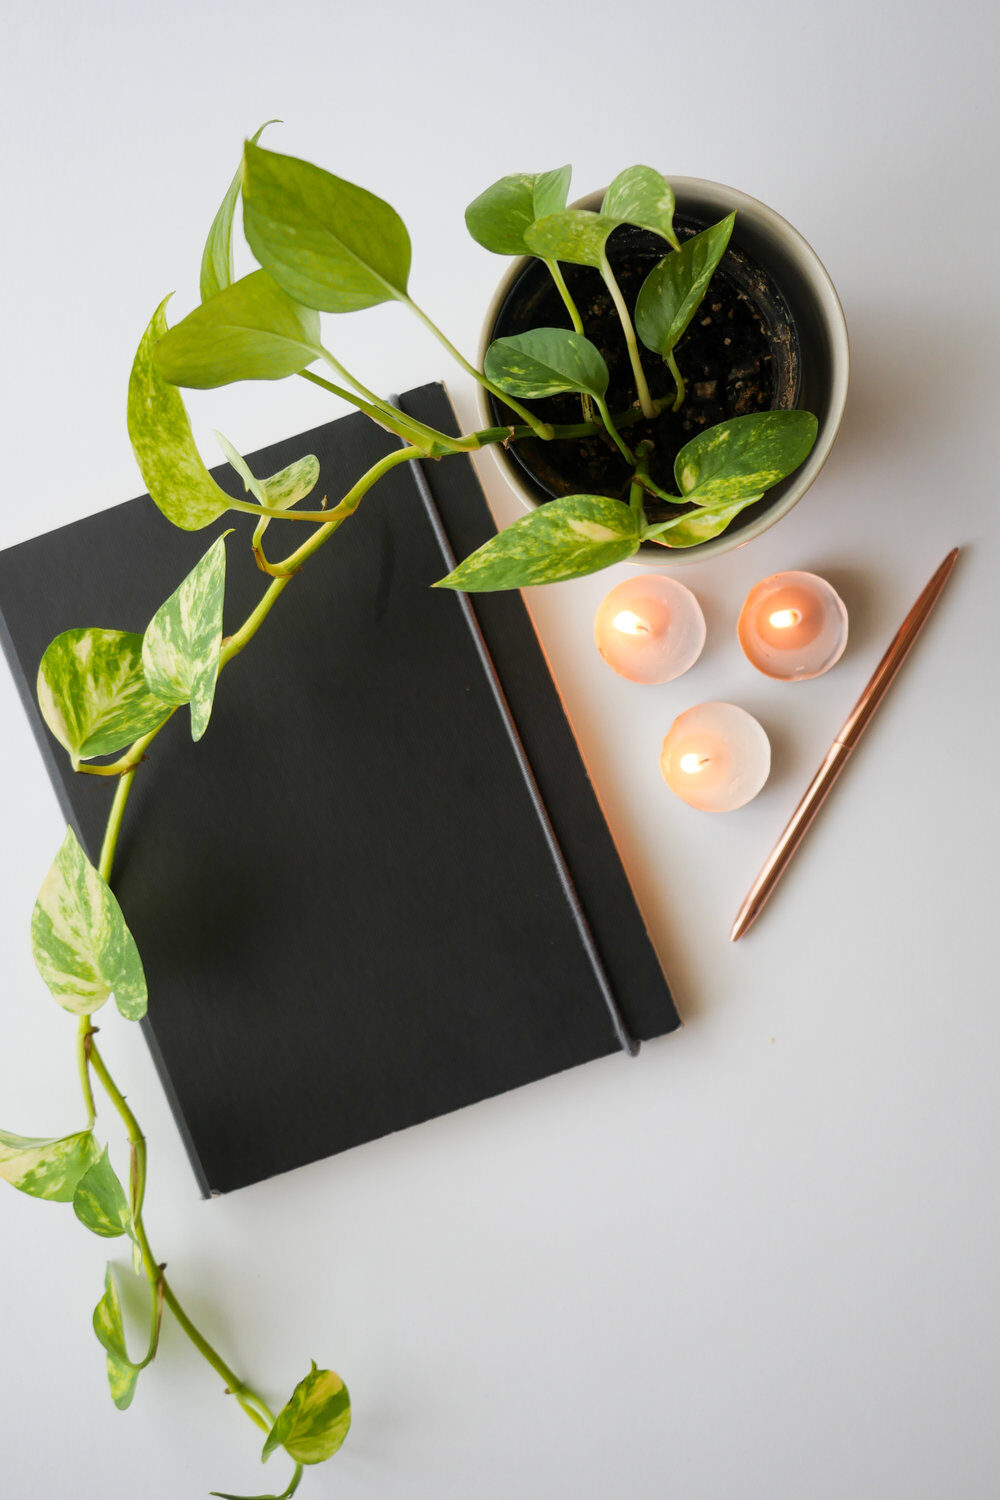 Journal with candles and plants on an desk